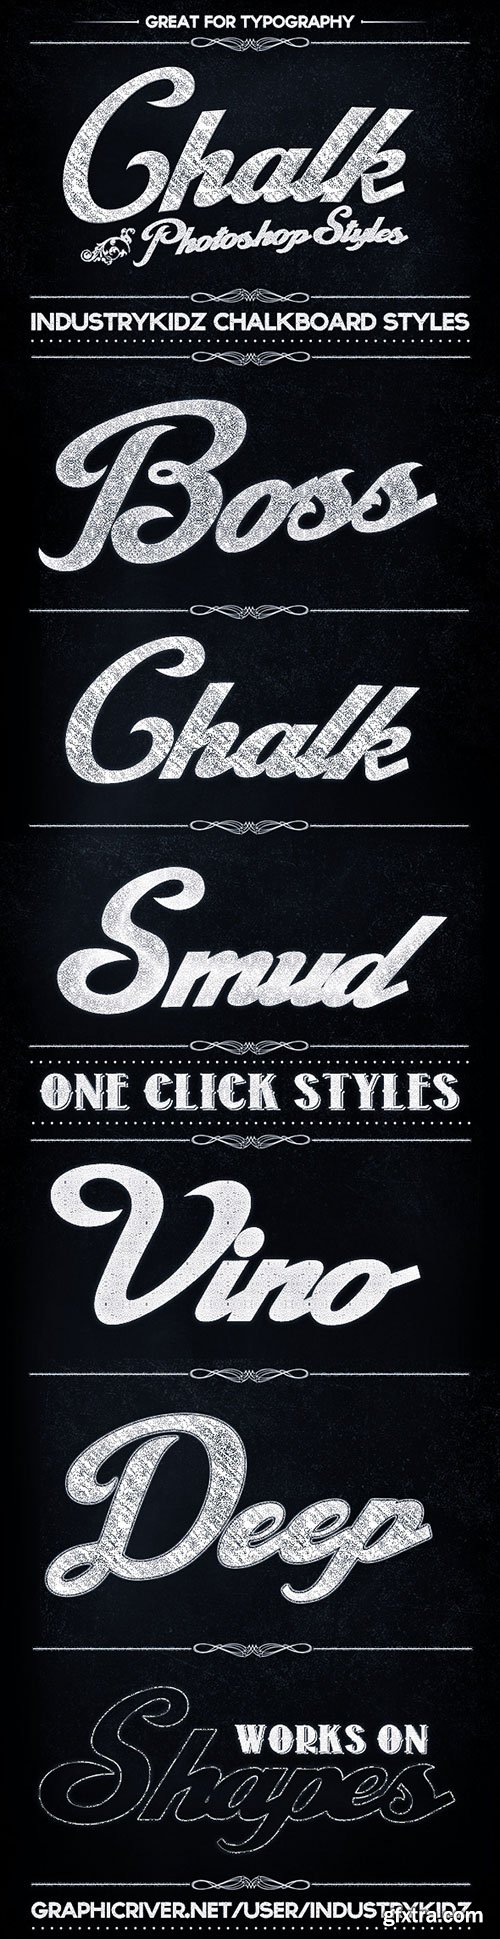 GraphicRiver - Chalkboard Photoshop Layer Styles